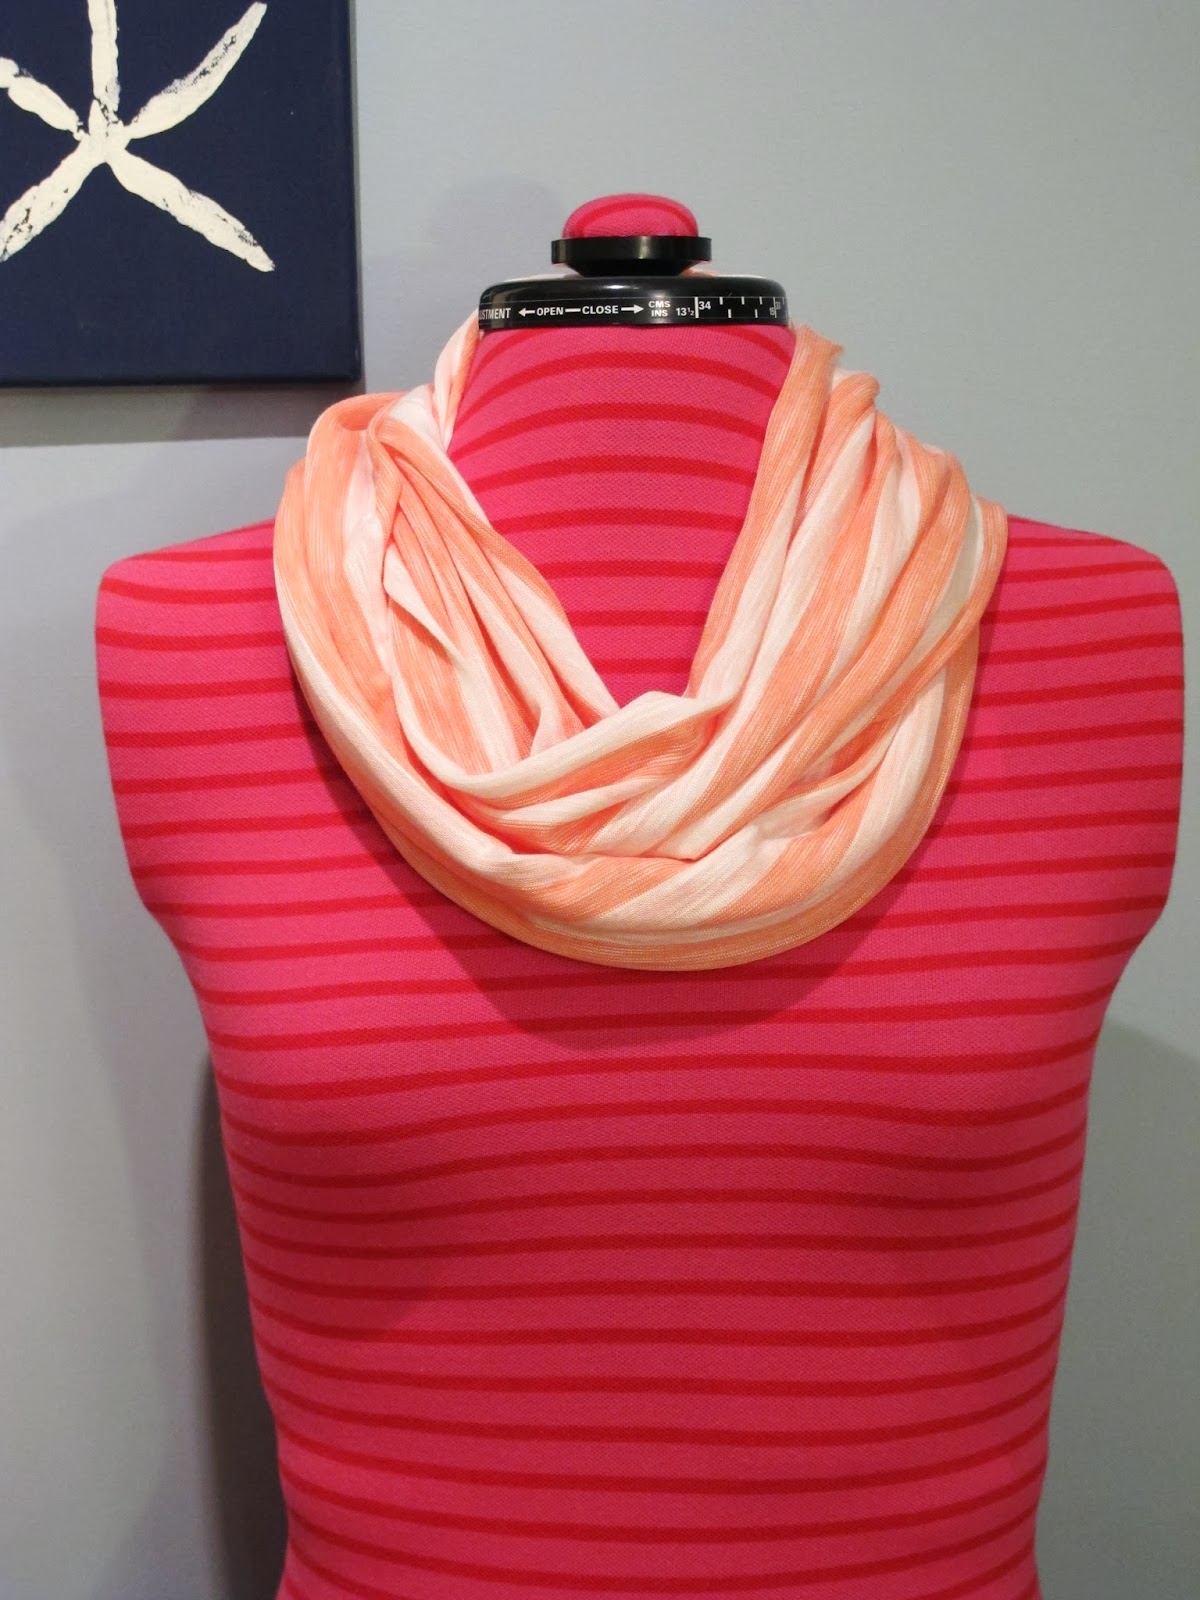 How to Make an Infinity Scarf | bonnieprojects.blogspot.com